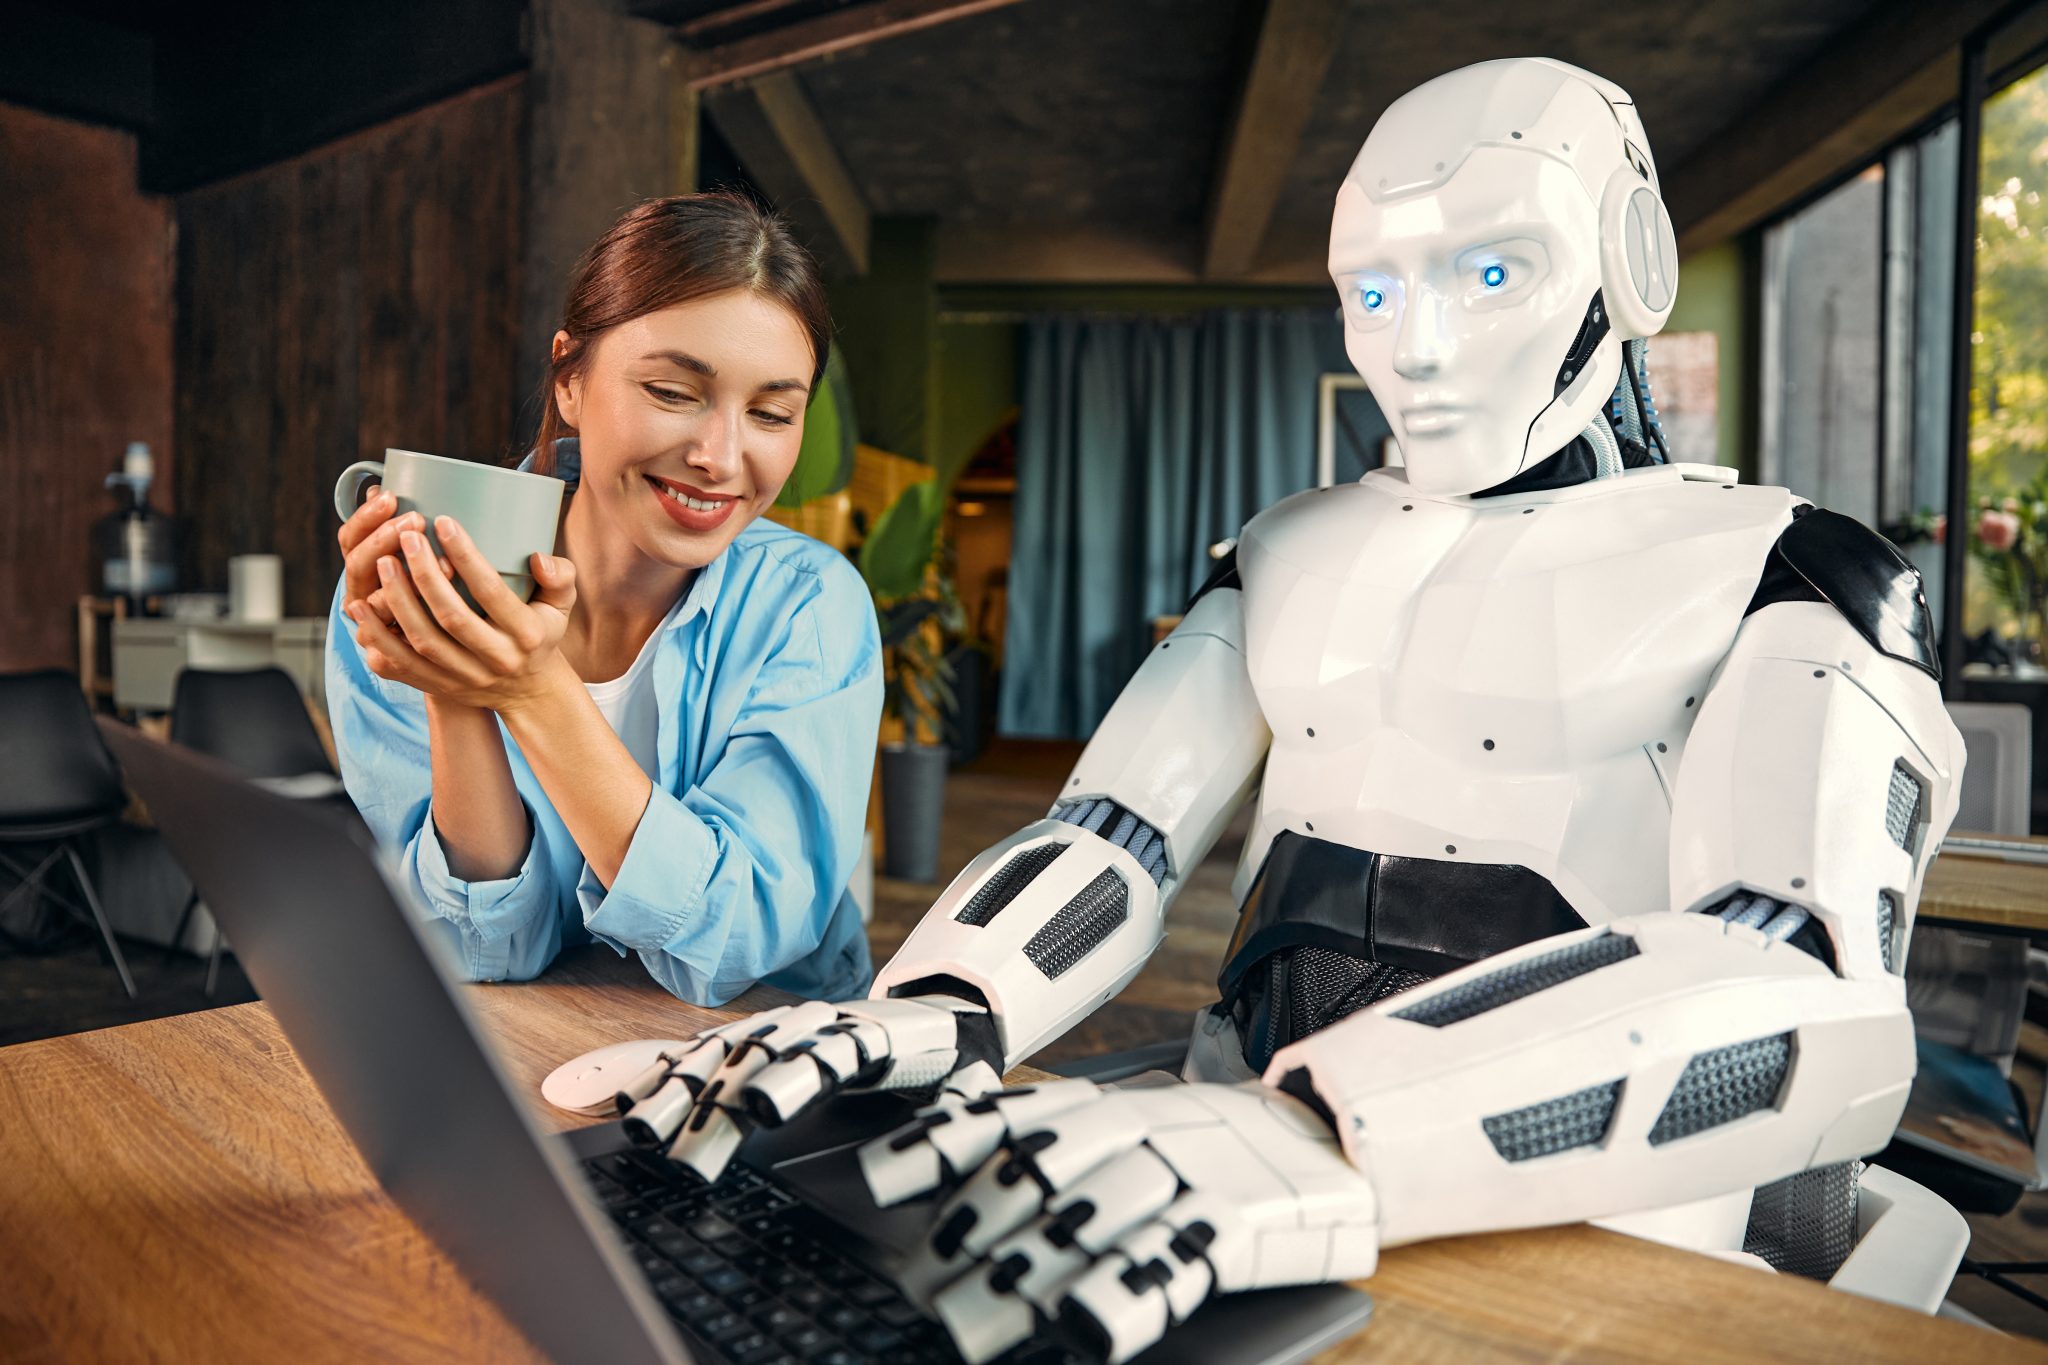 robot and woman working on laptop in office 2023 11 27 04 57 48 utc scaled